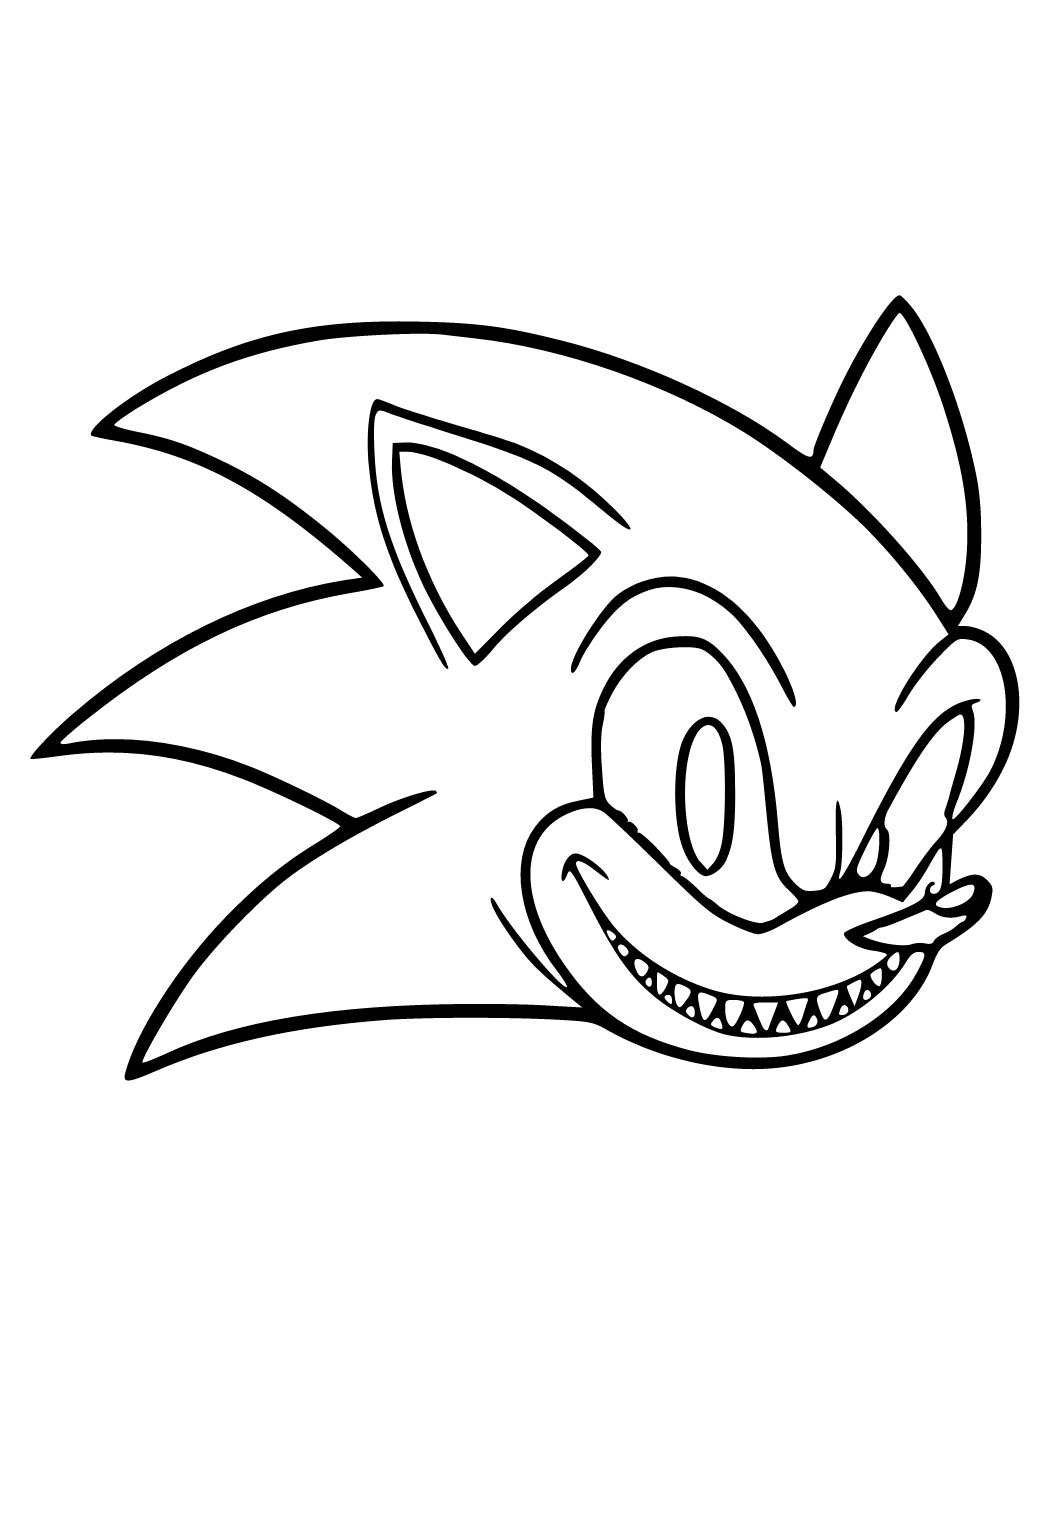 Sonic Coloring Page  Раскраски, Бесплатные раскраски, Раскраски